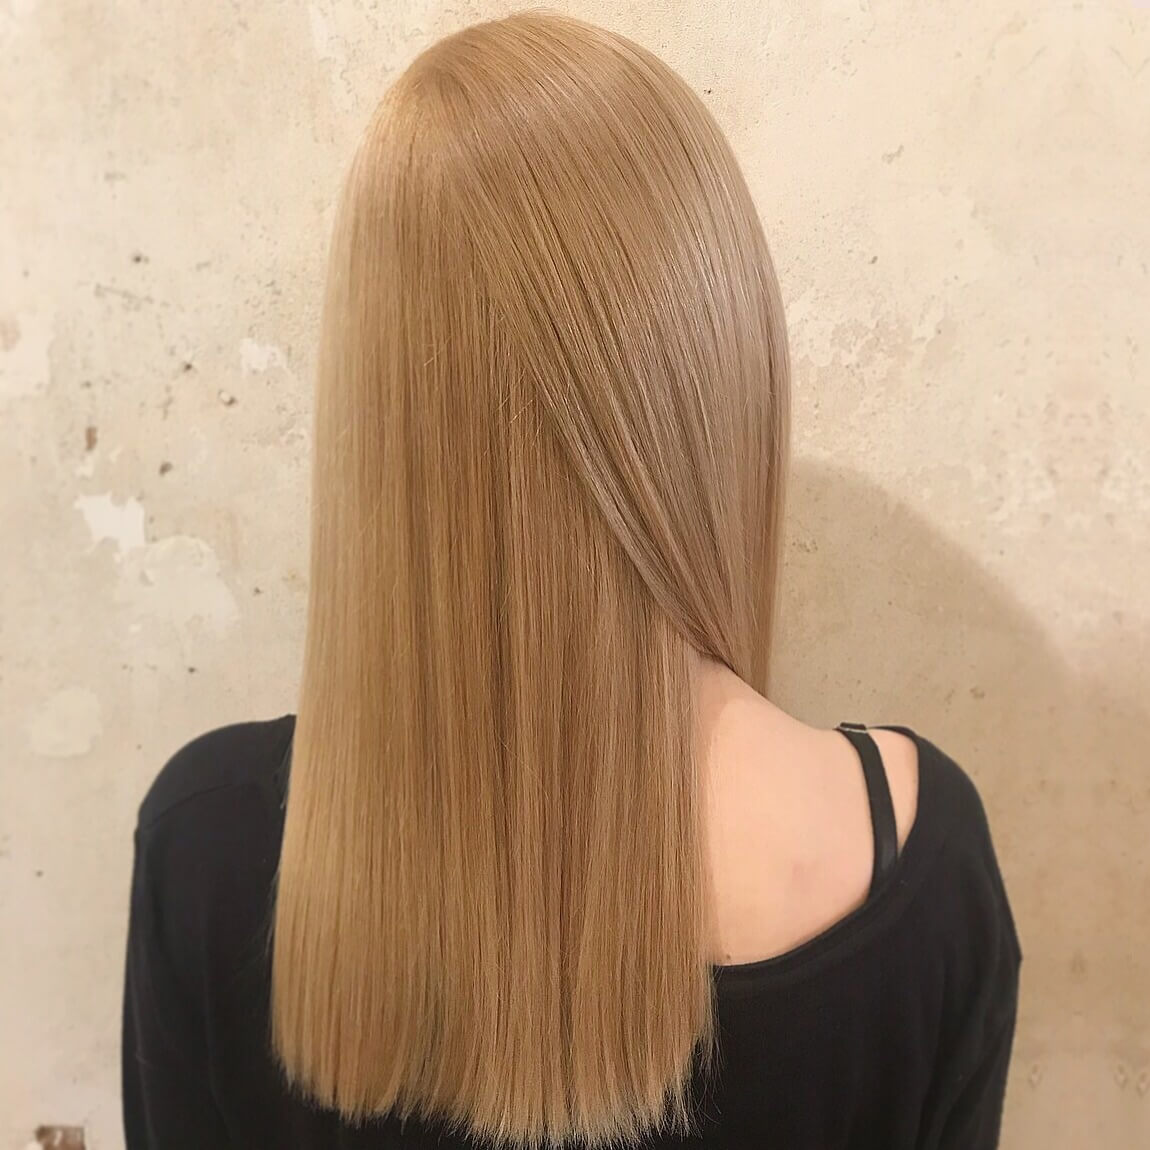 smooth long blonde hair with Keratin treatment at ESHK hairdressers in Clerkenwell, London